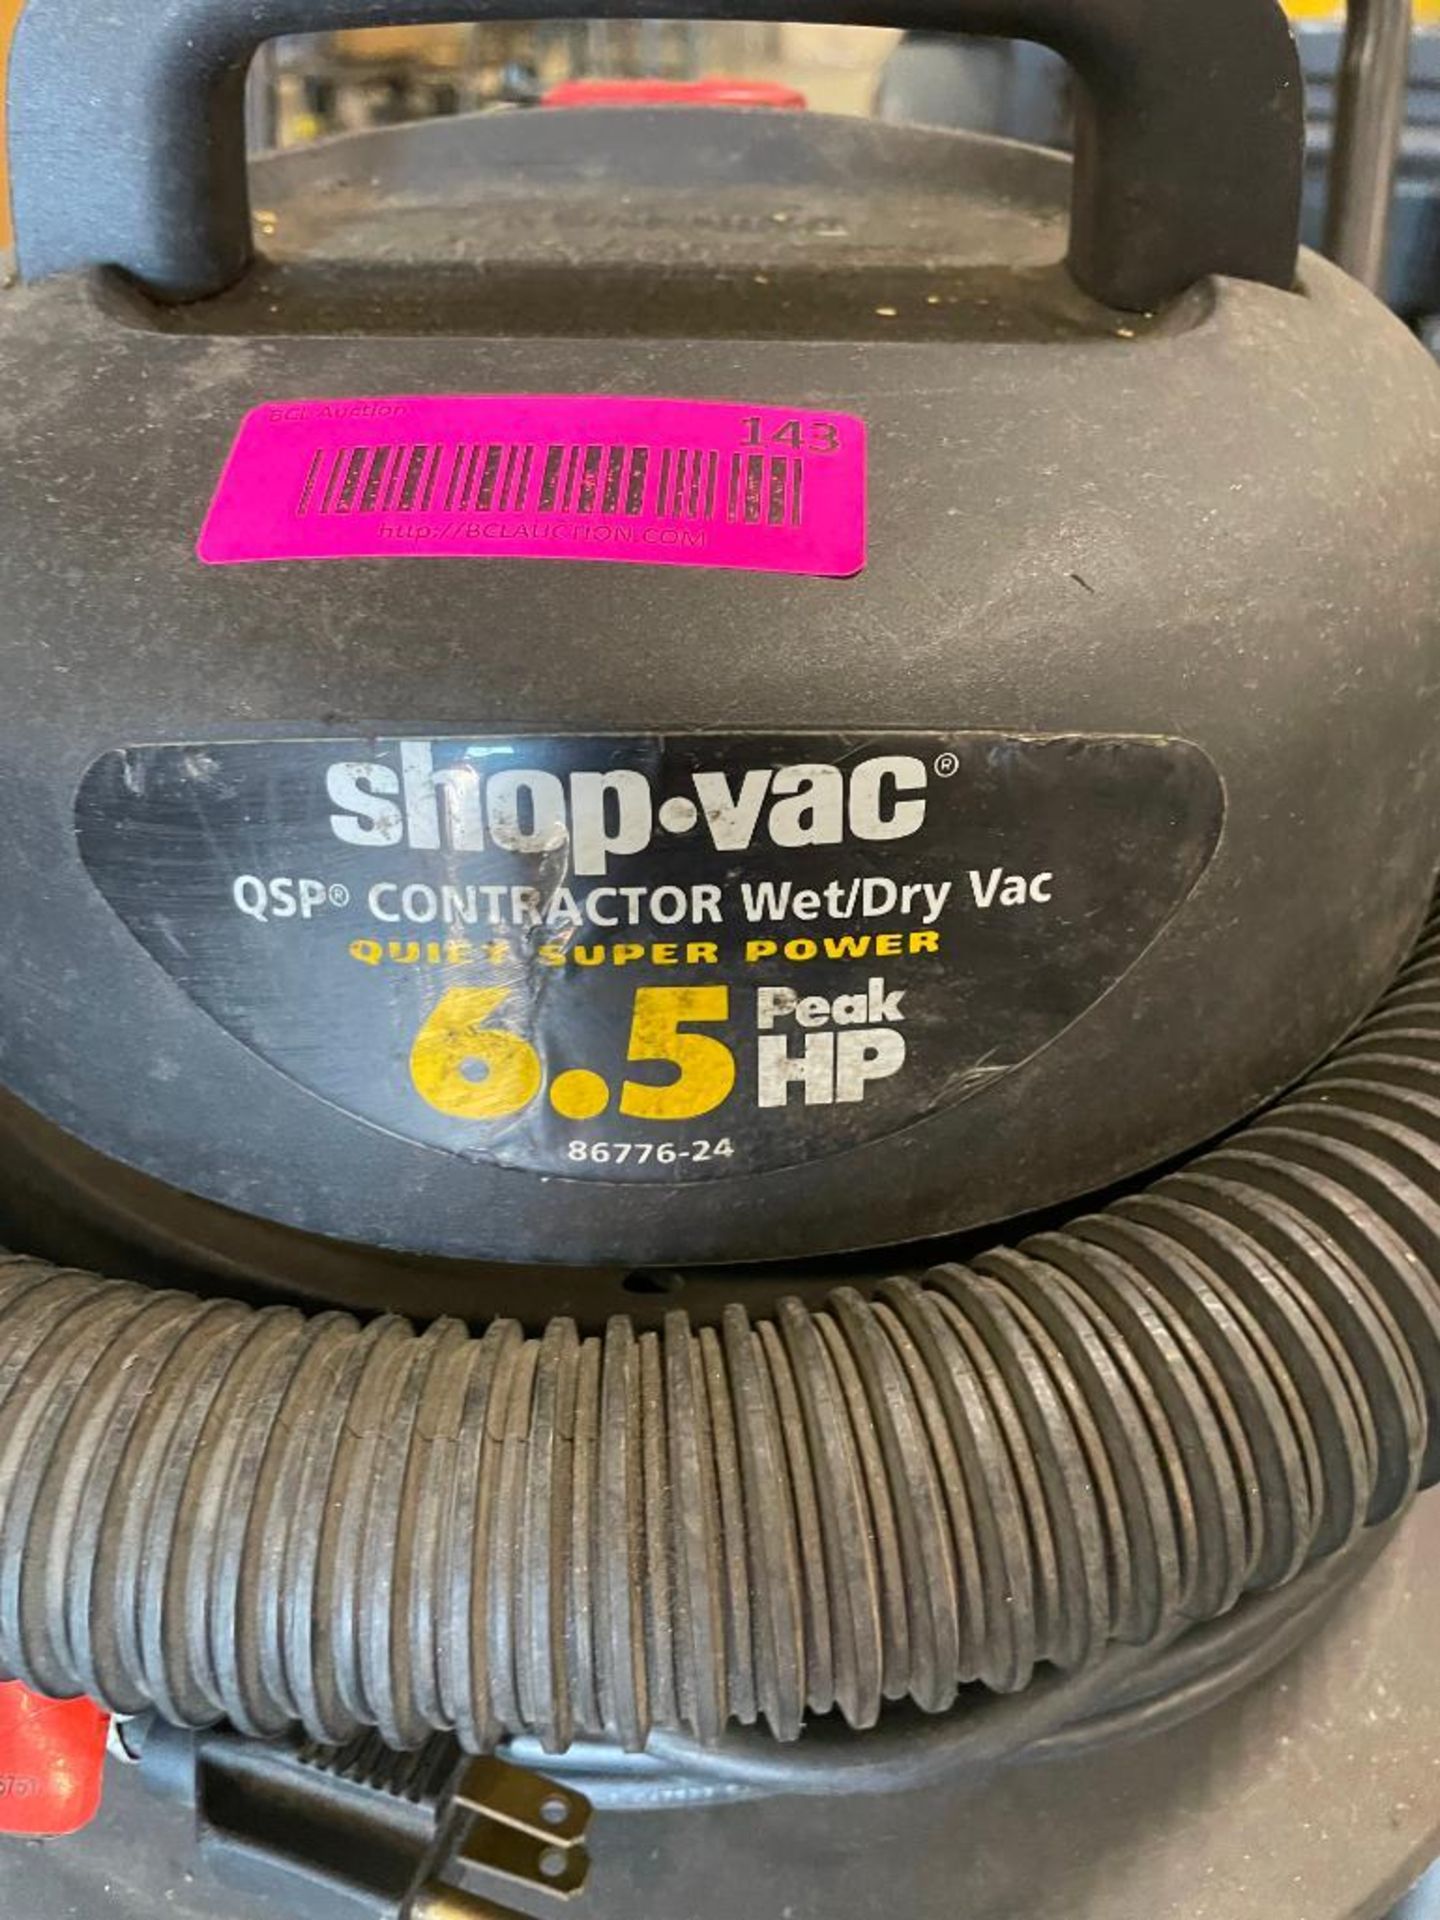 12 GALLON 6.5 HP QSP CONTRACTOR WET/DRY VAC BRAND/MODEL: SHOP VAC LOCATION: WAREHOUSE QTY: 1 - Image 2 of 2